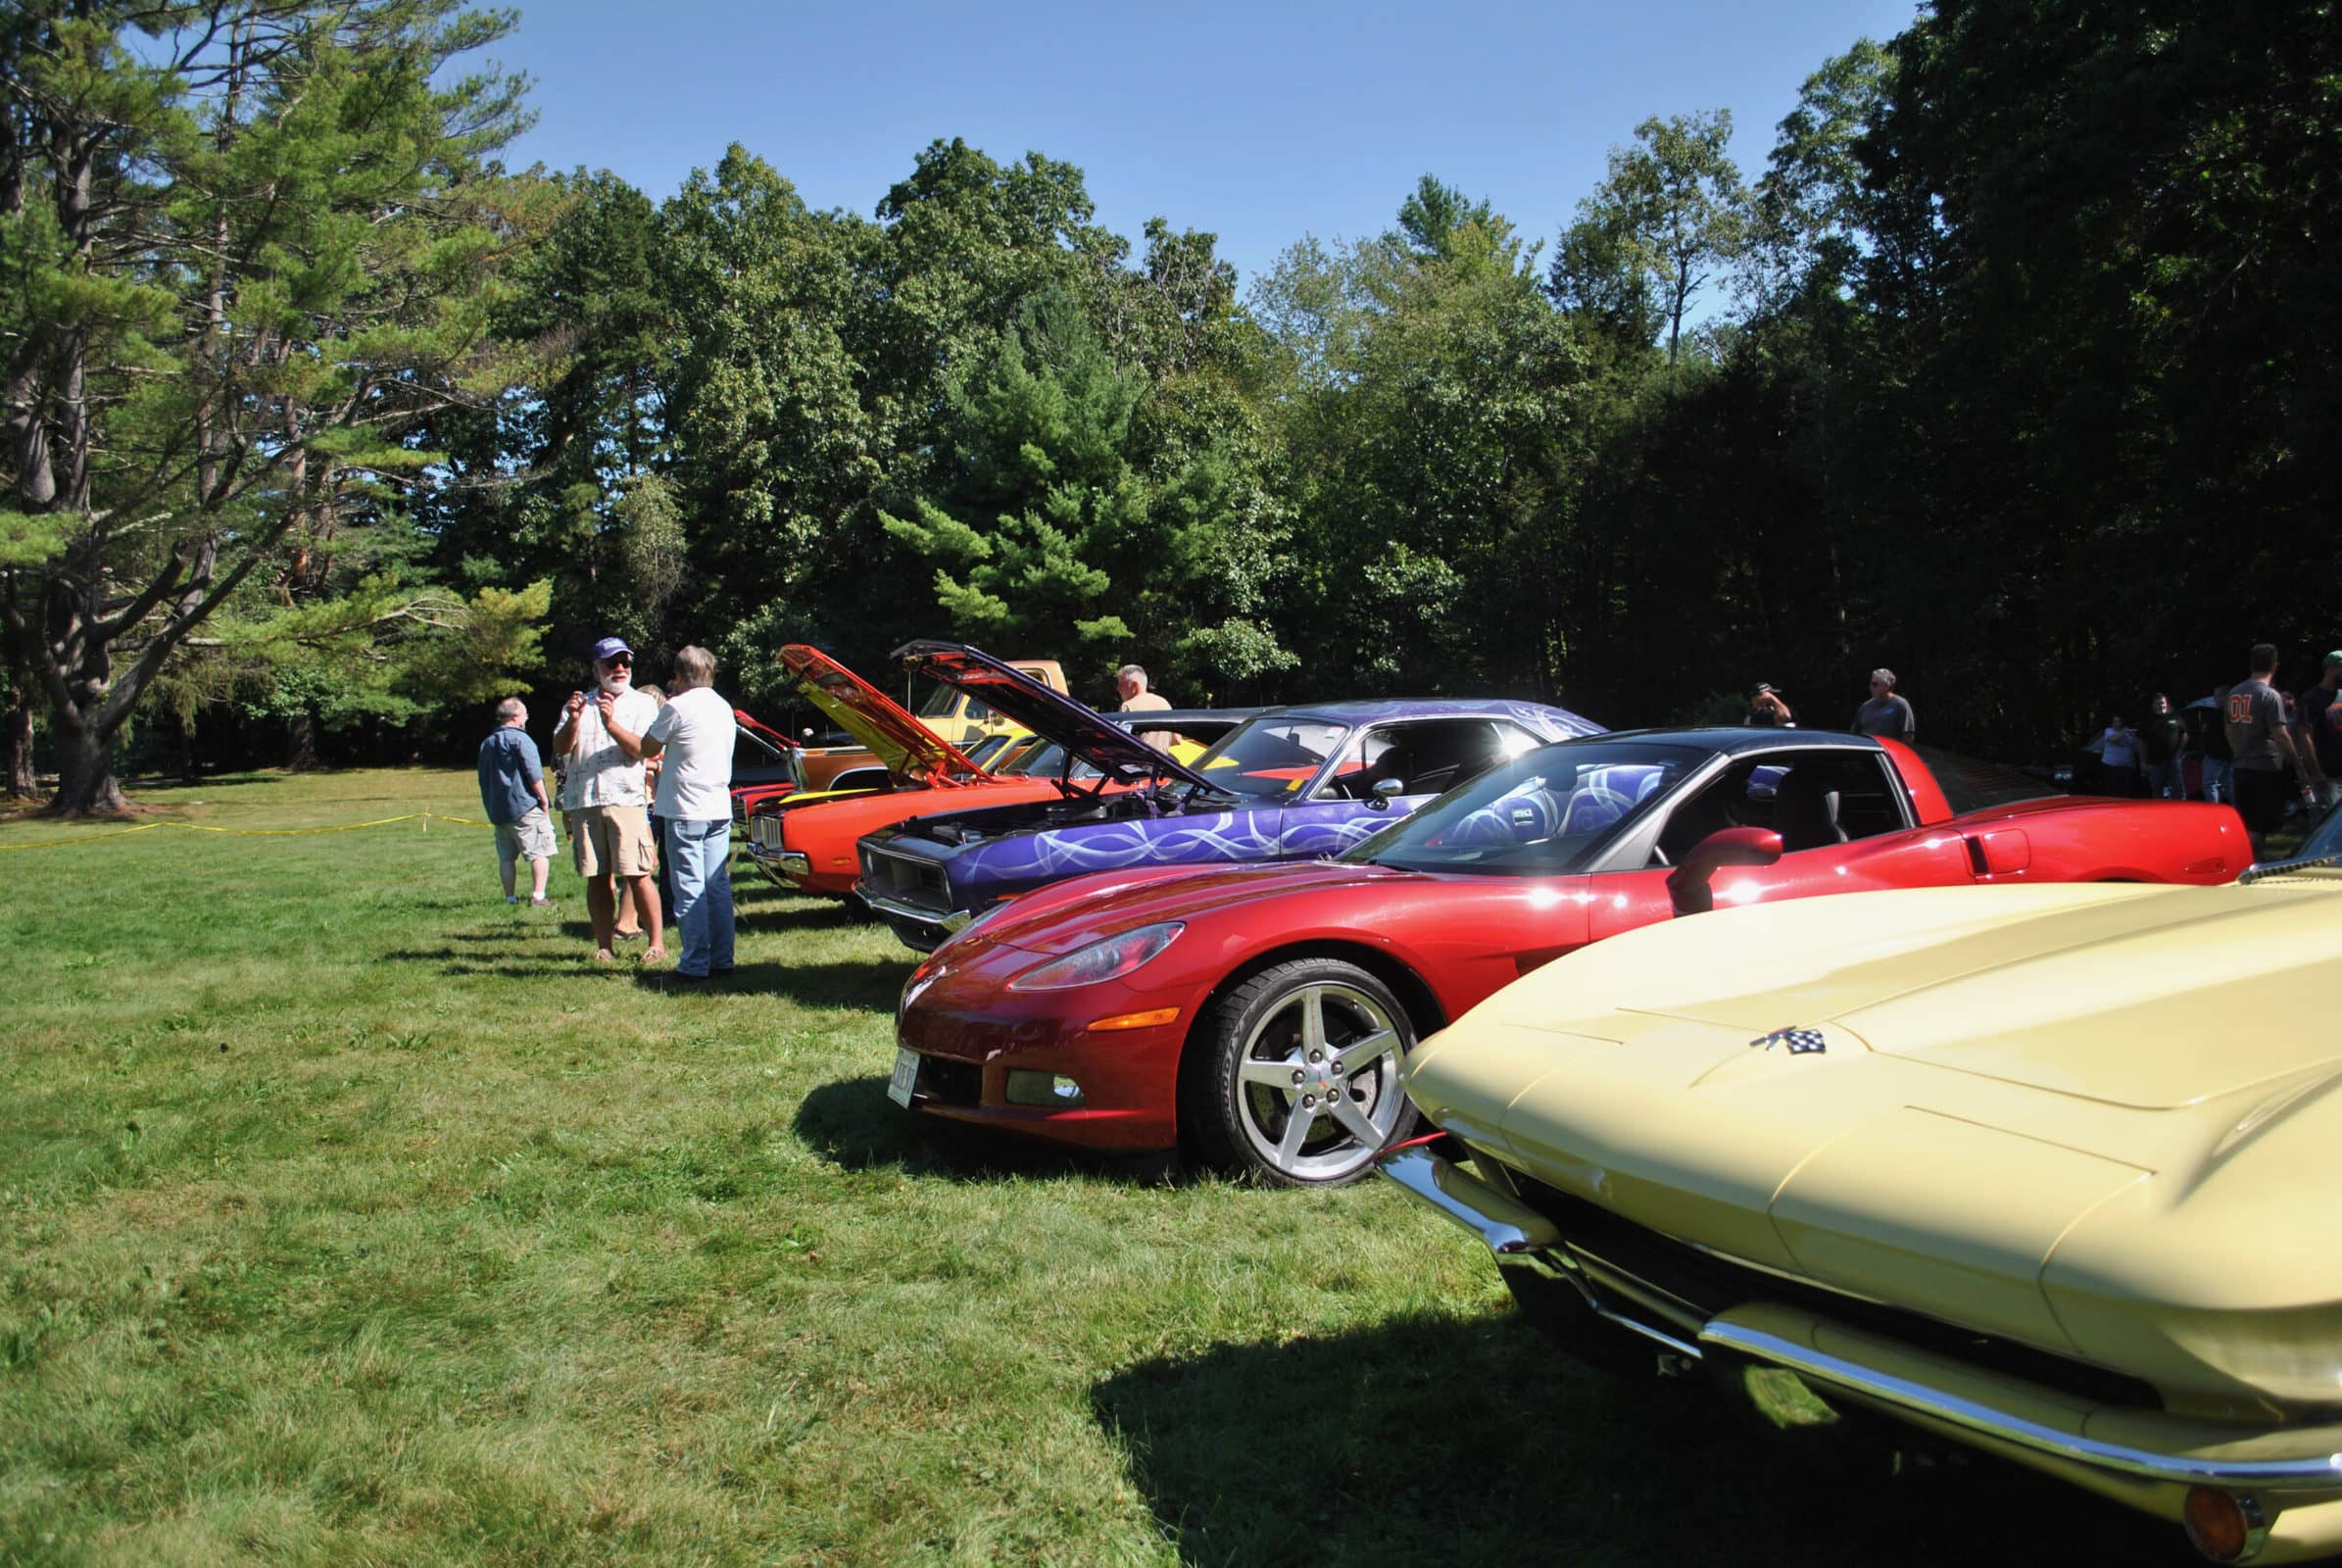 Cars sit lined up at the Marlborough Fish & Game Association during this past weekend’s A&M reunion car show.